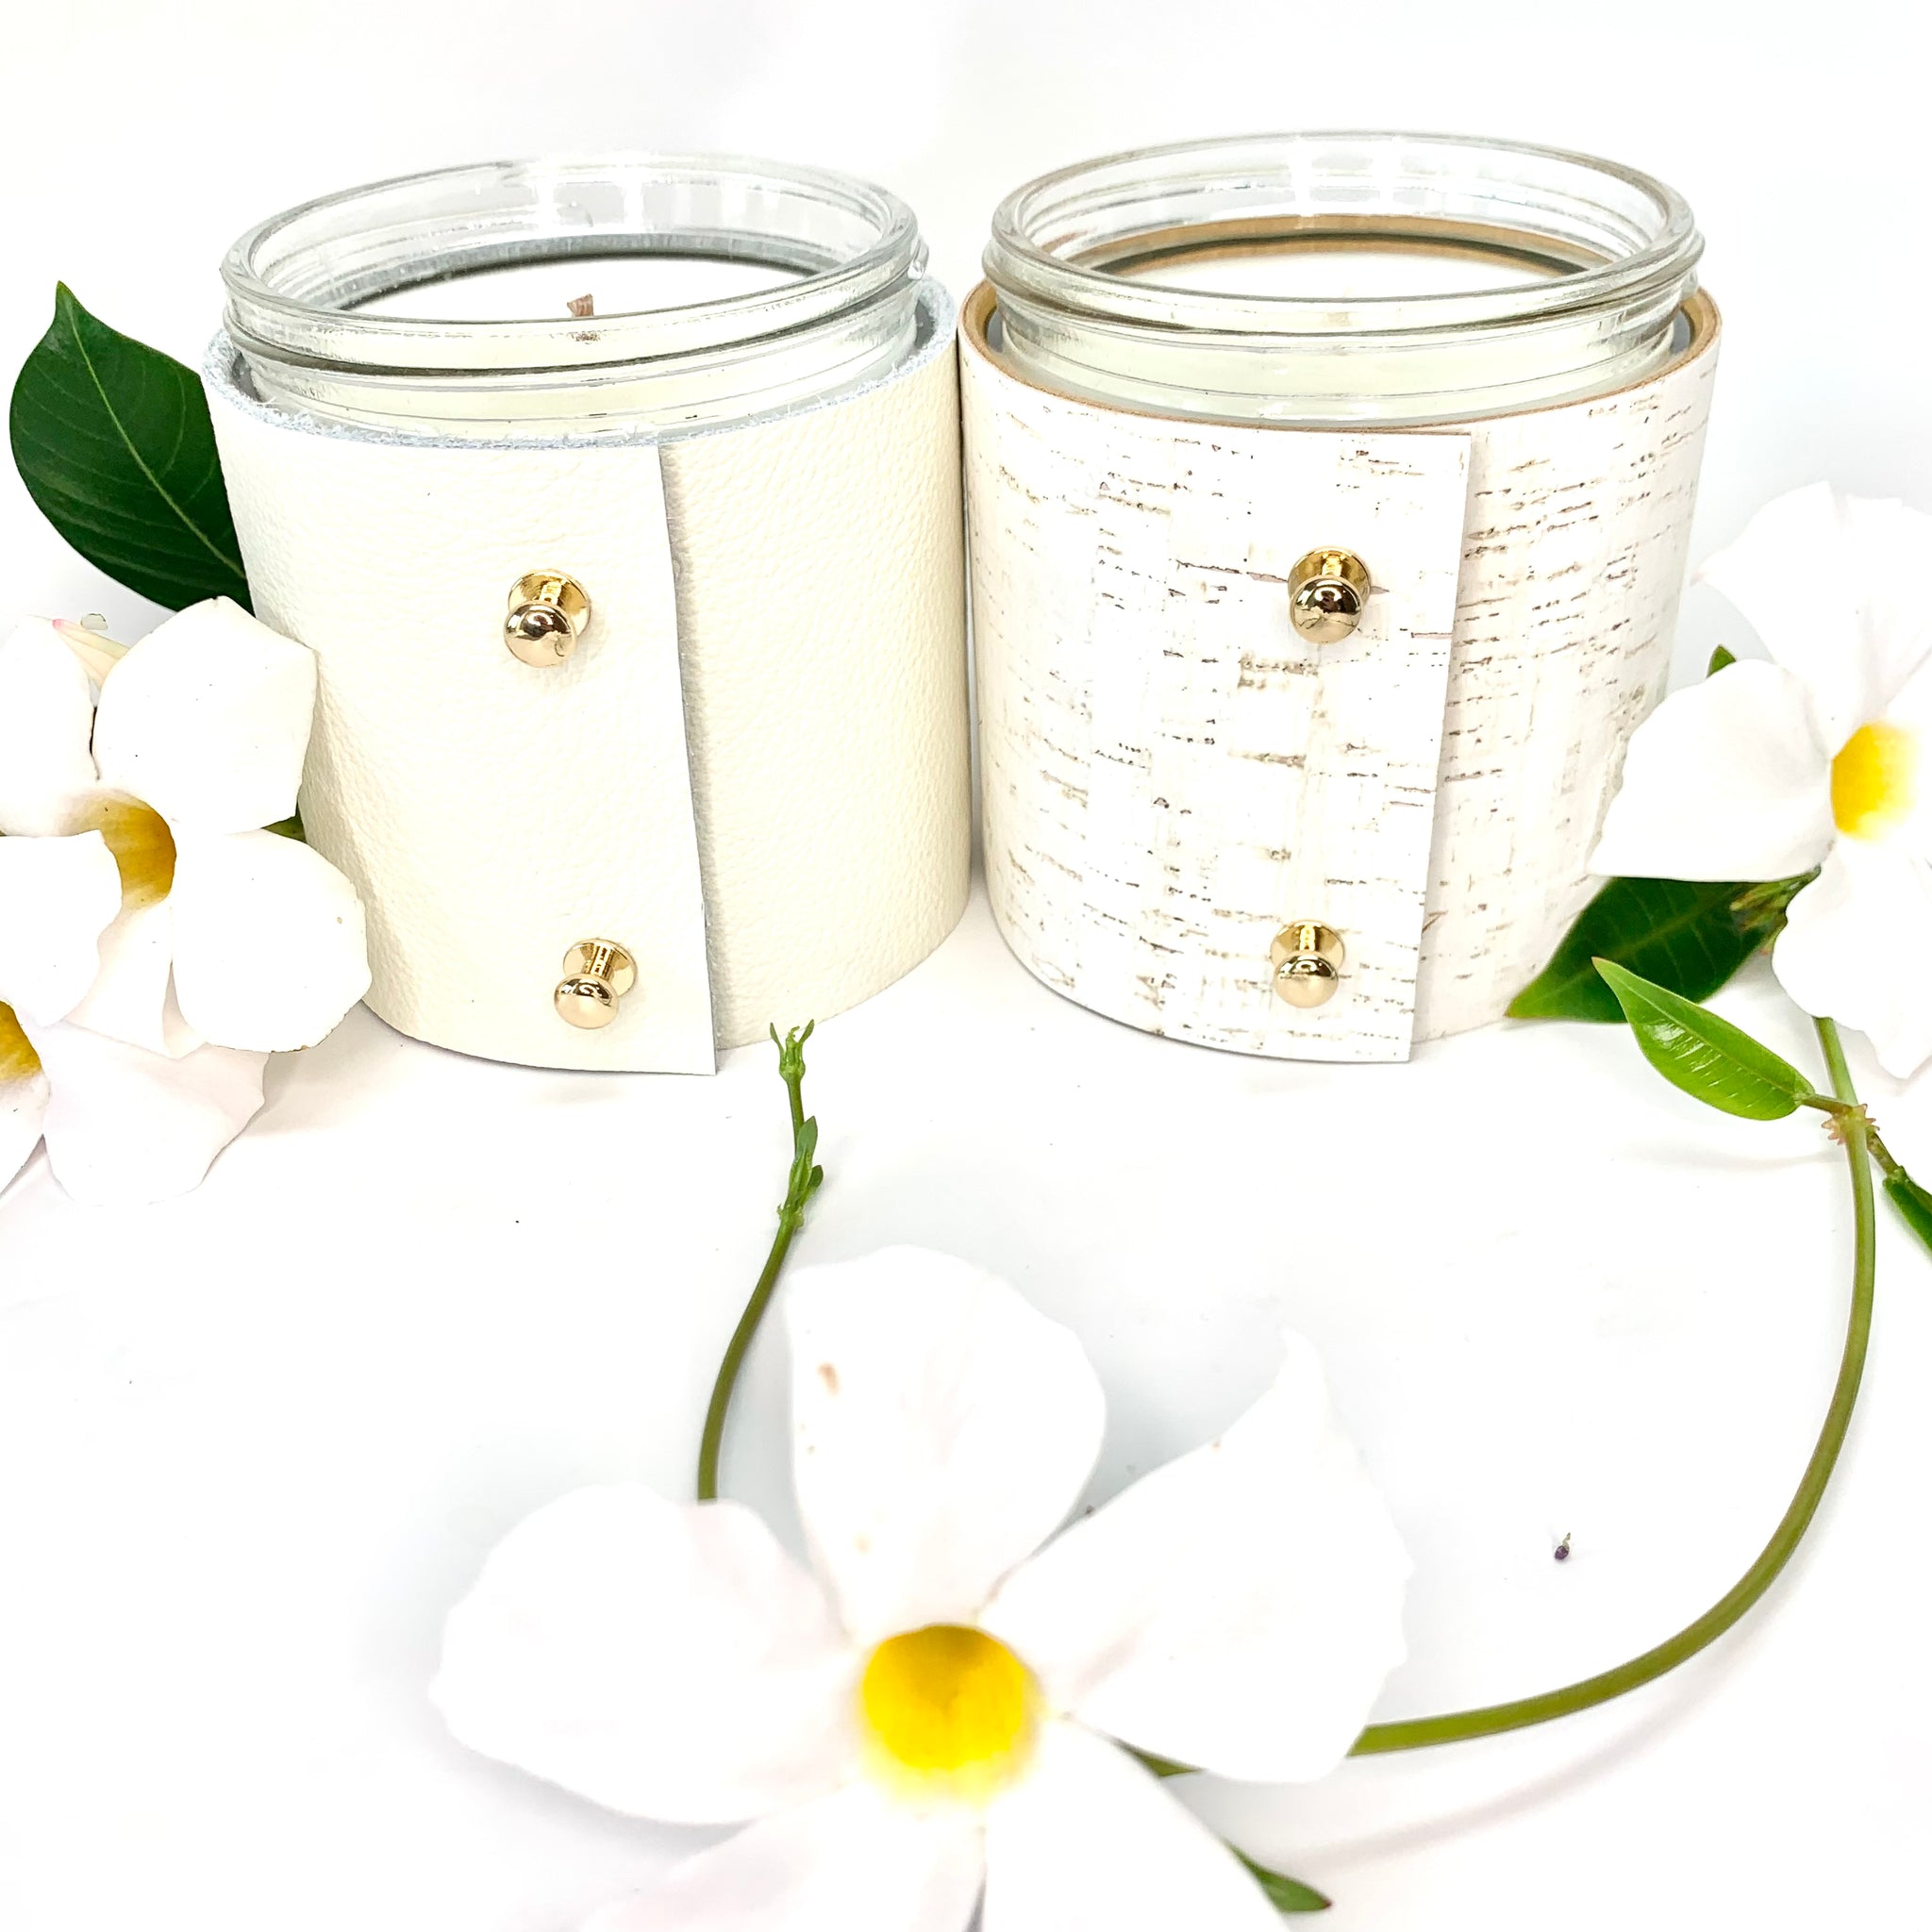 2 Luxury floral soy candles in topical plumeria and beautiful rose and gardenia scented candles wrapped in fine white leather and white cork with gold button studs